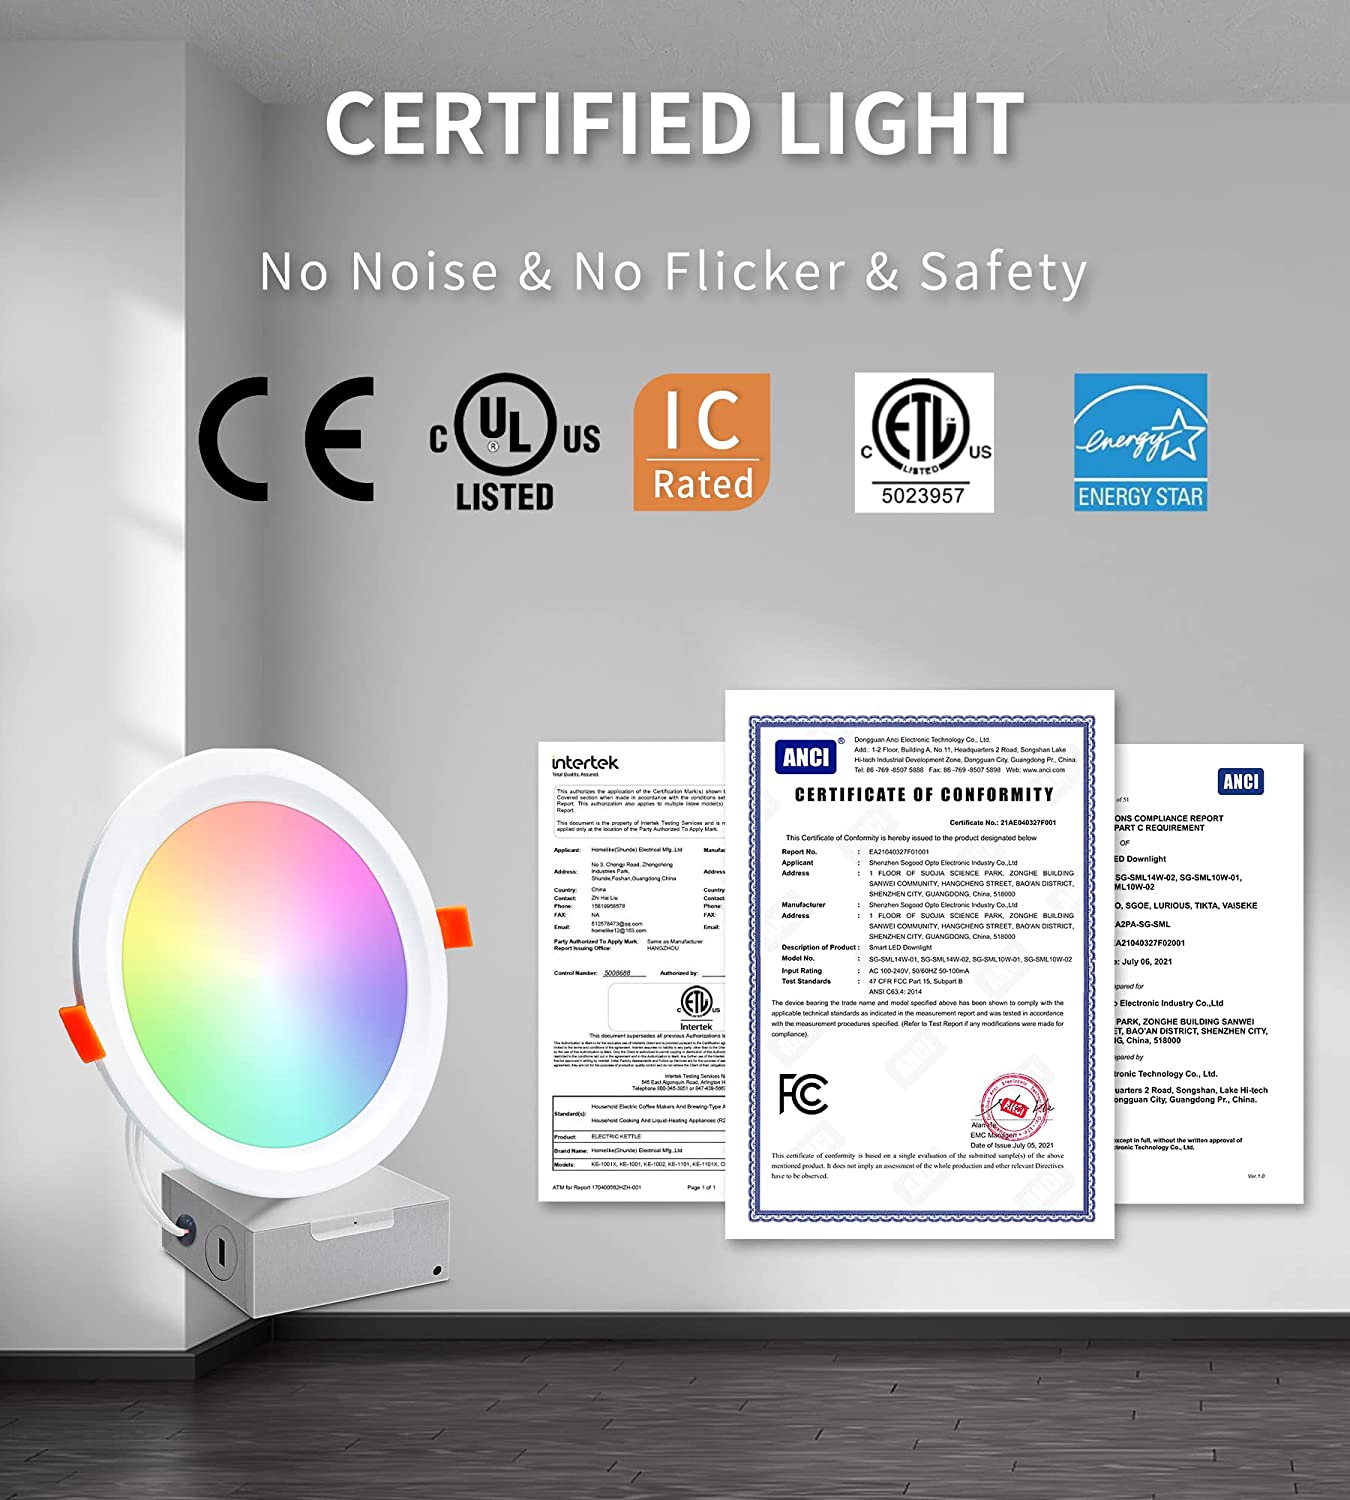 Smart Recessed Lighting 6 Inch,IC Rated-ETL Certified Ultra-Thin RGB LED Recessed Lights,Dimmable Downlight Light Work with Alexa,Color Changing Ceiling Sync to Music,800LM,6 Pack(with 2.4GHz Hub)